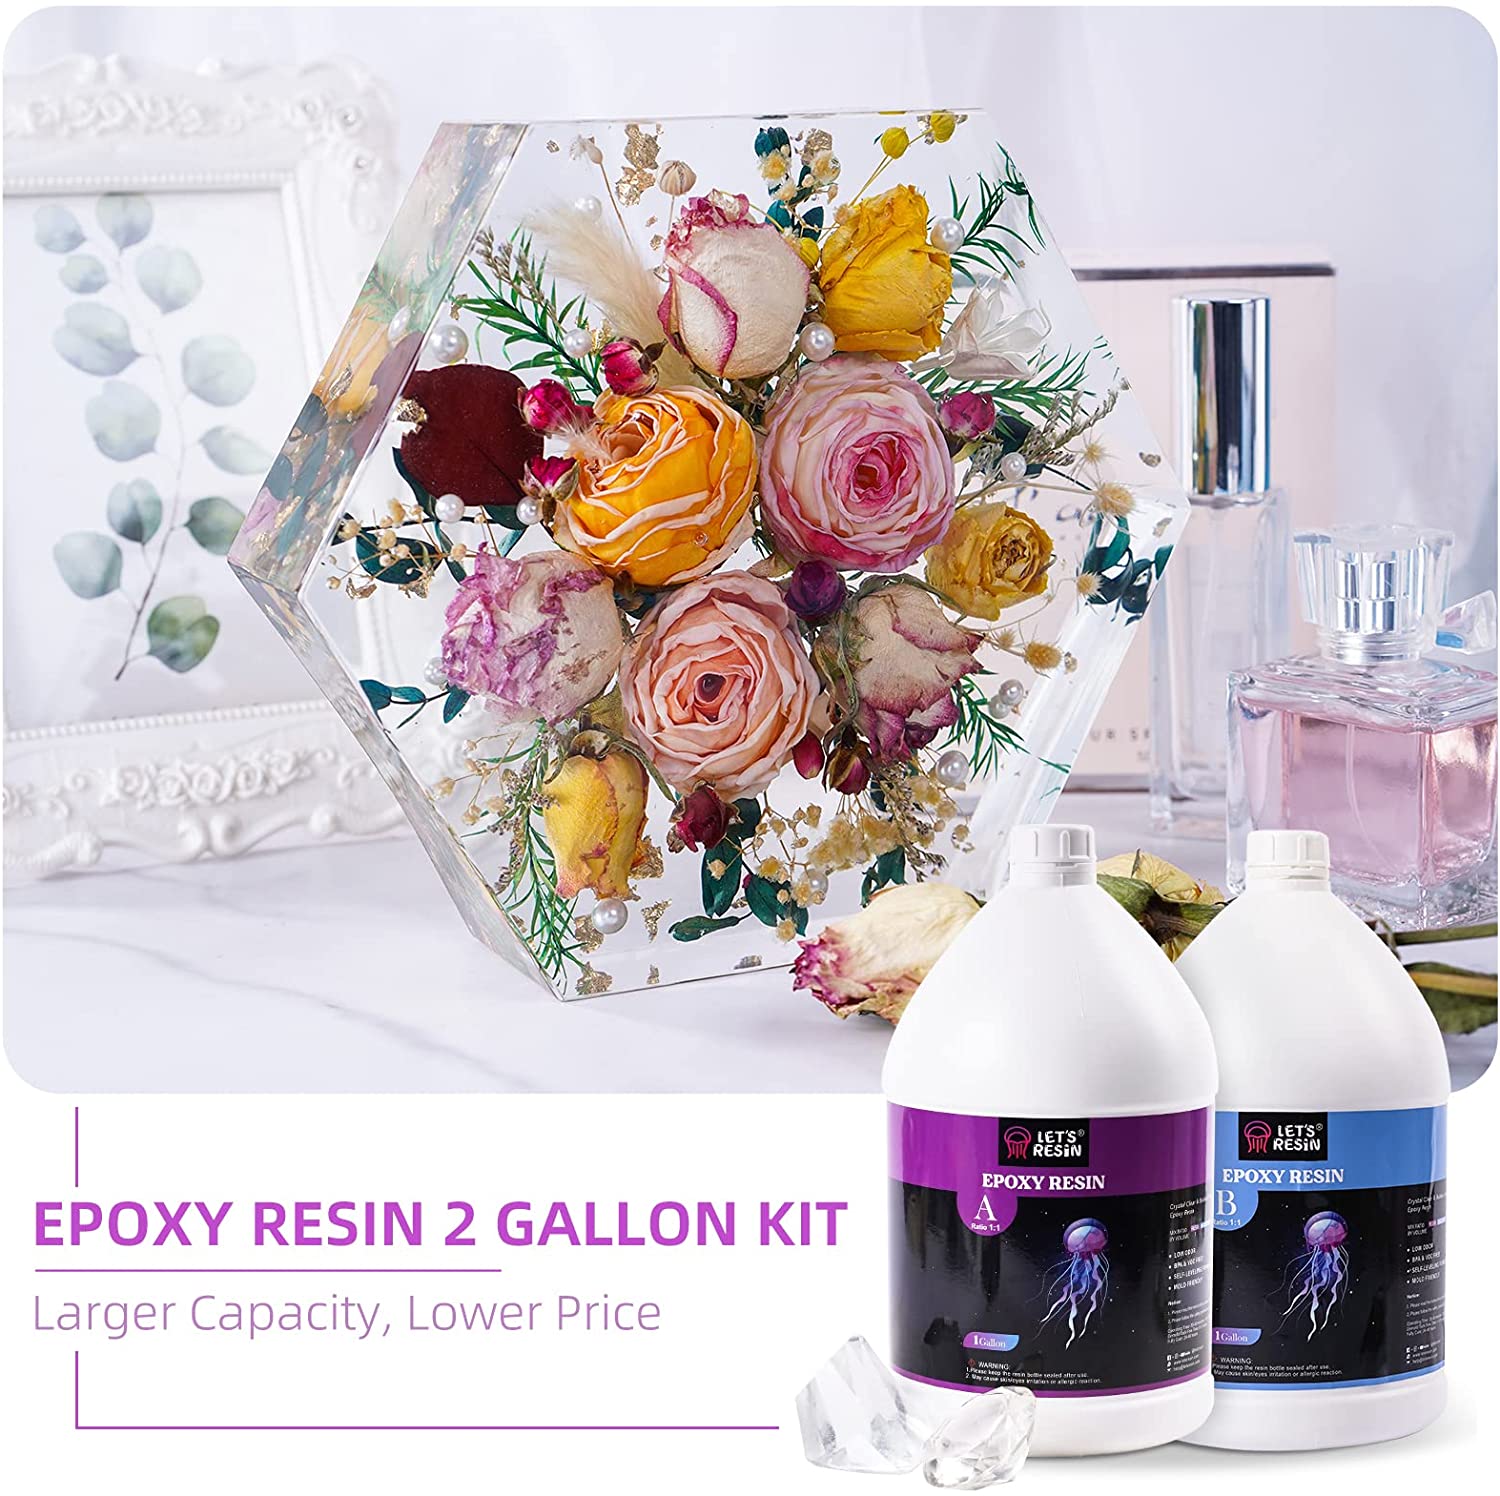 Let's Resin 32oz Crystal Clear Epoxy Resin Art Crafts 2 Part Epoxy Bubble-Free, Low Odor, Yellowing Resistance